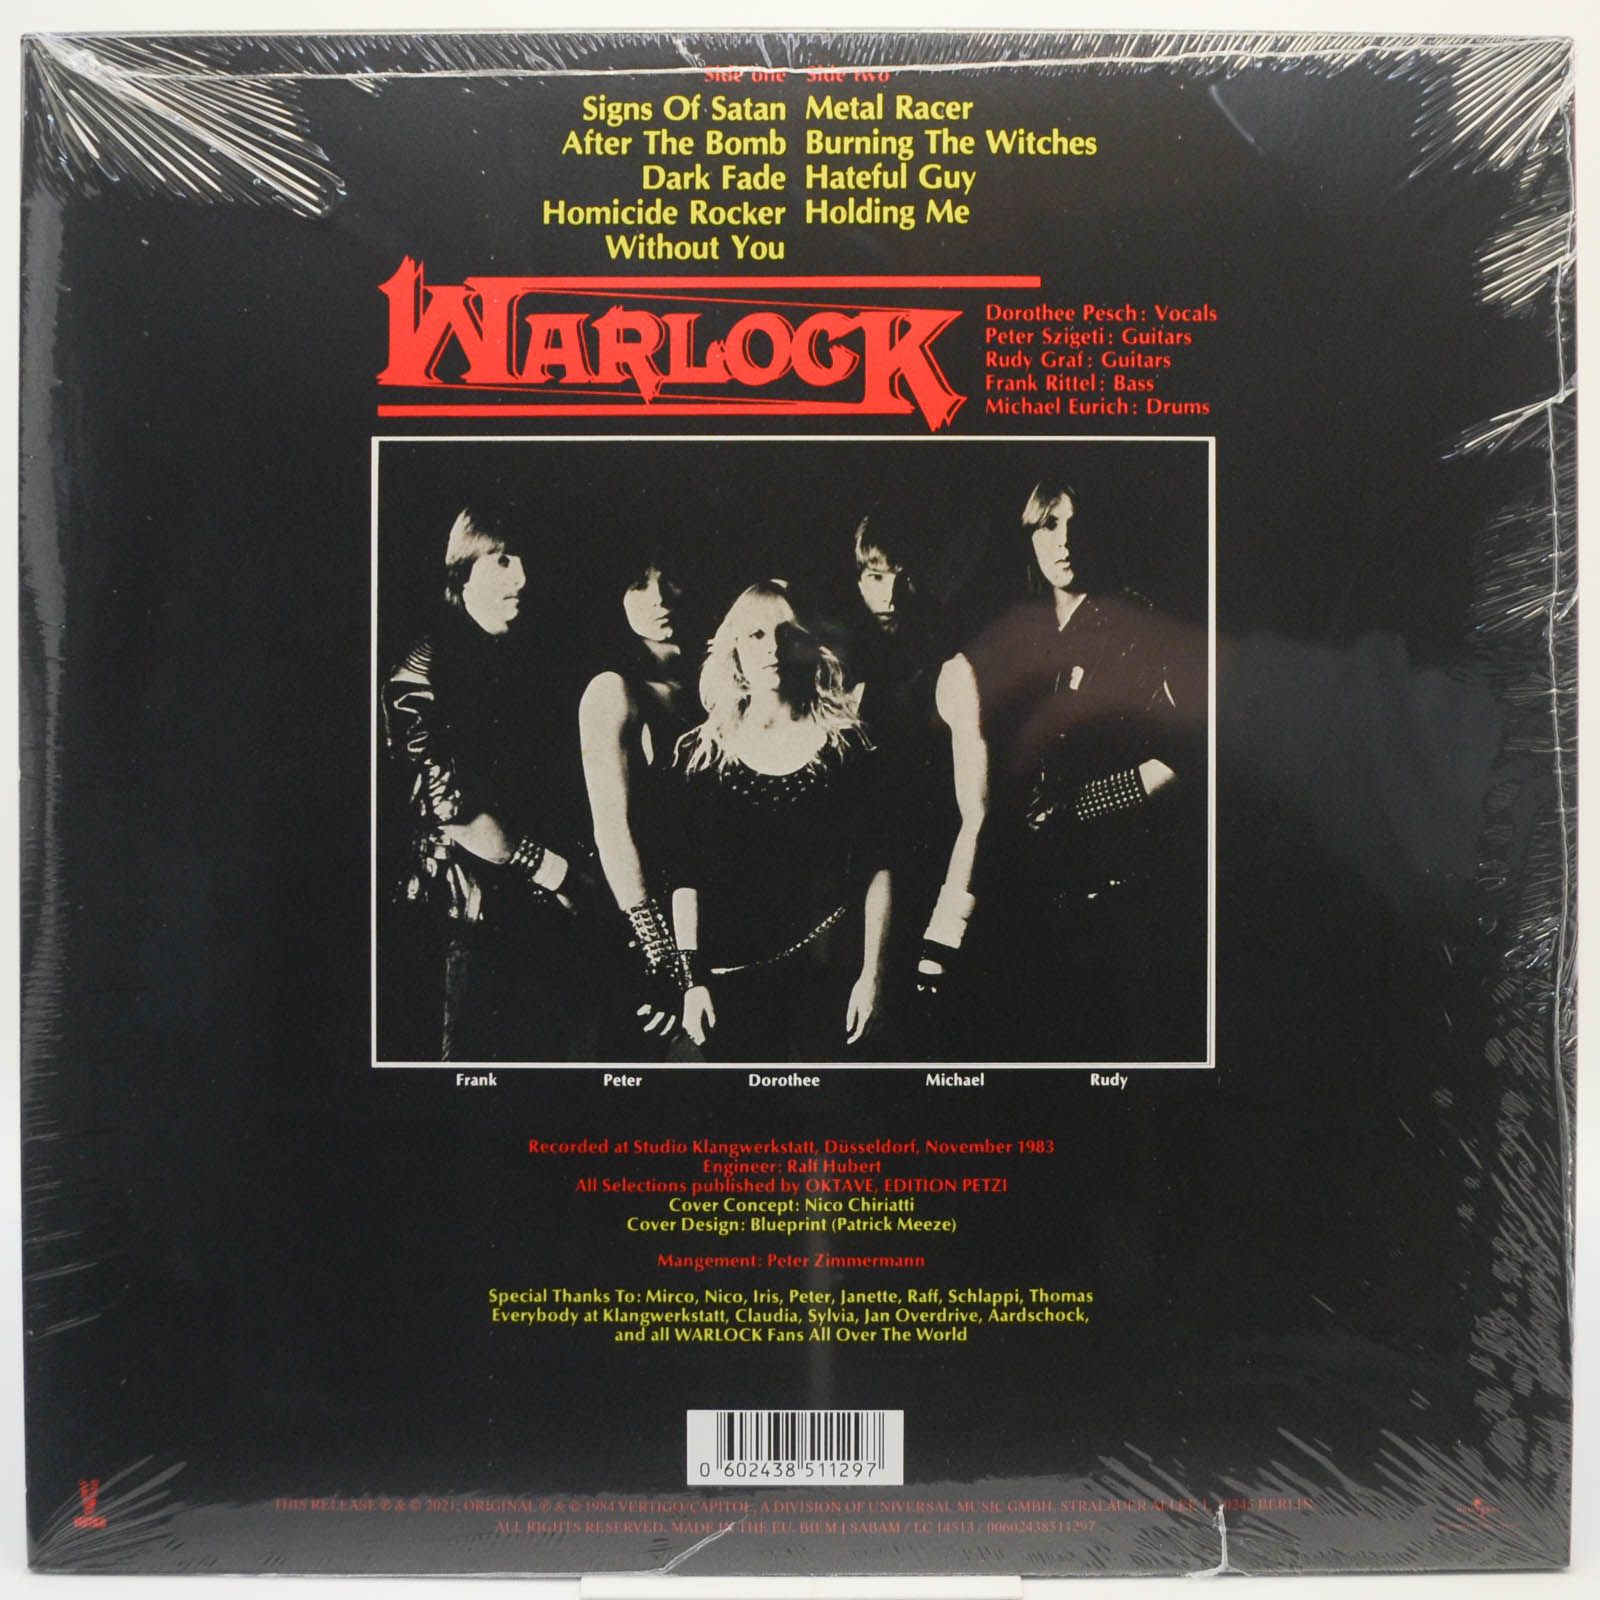 Warlock — Burning The Witches, 1984